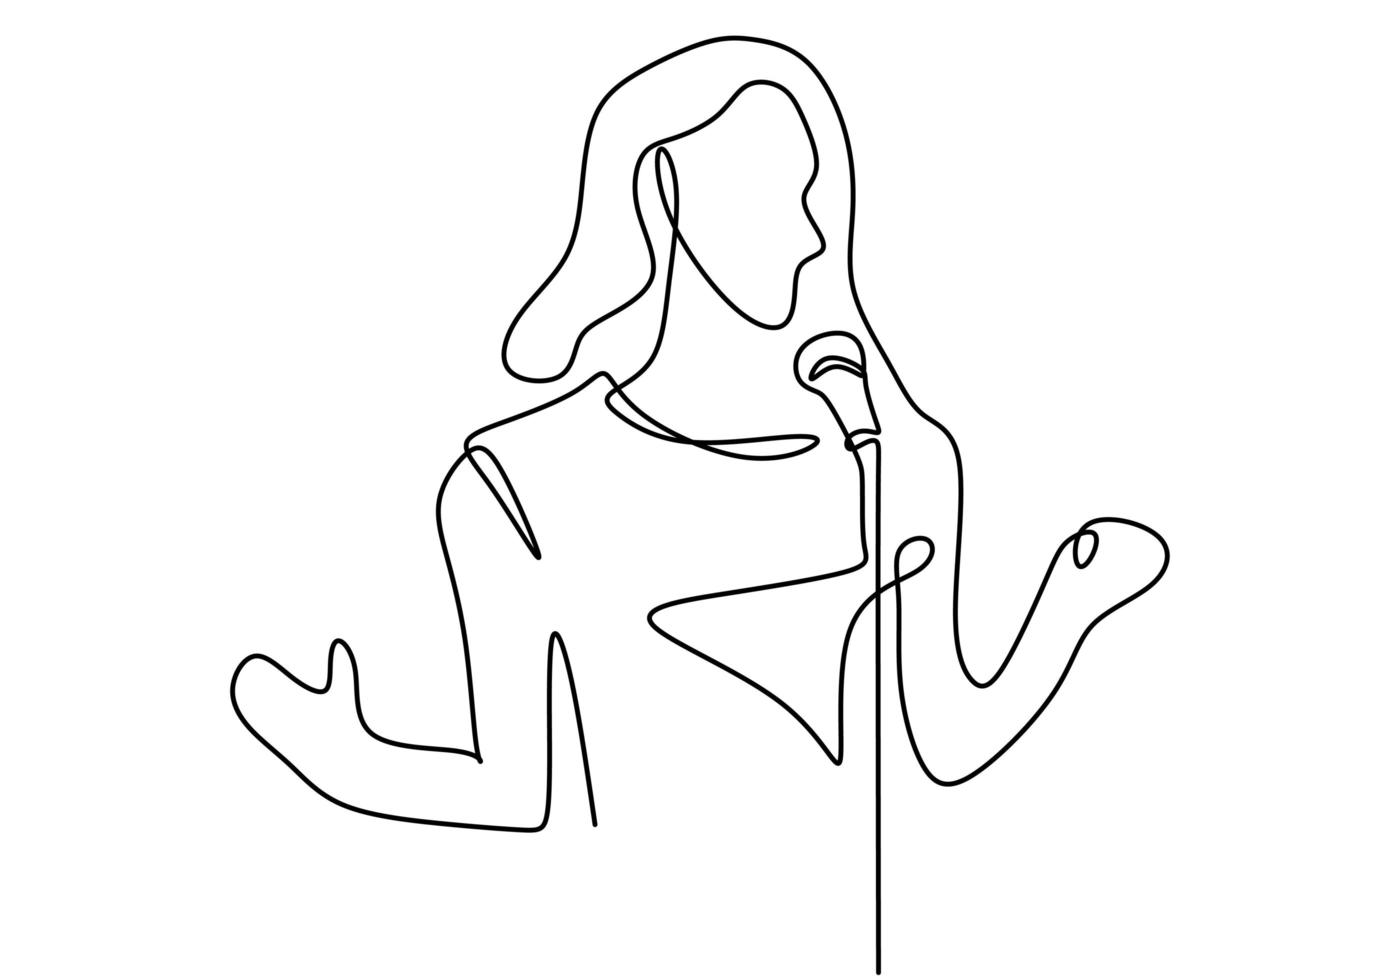 A singer perform with her song. Entertain audience with her voice. Singing romantic song. Musician artist performance concept single line draw design illustration. Vector